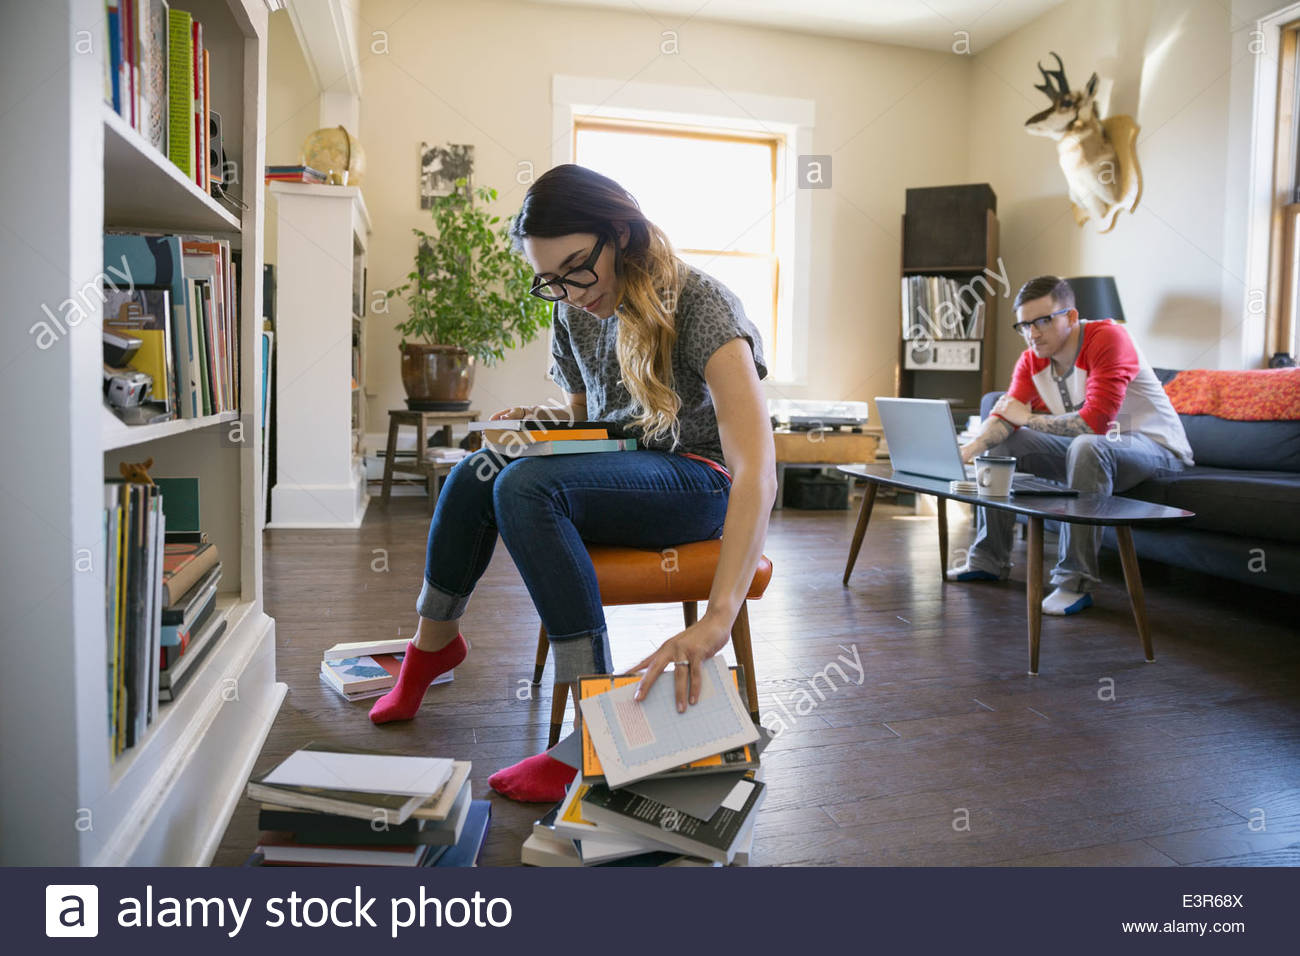 Woman sorting through books in bookcase Stock Photo